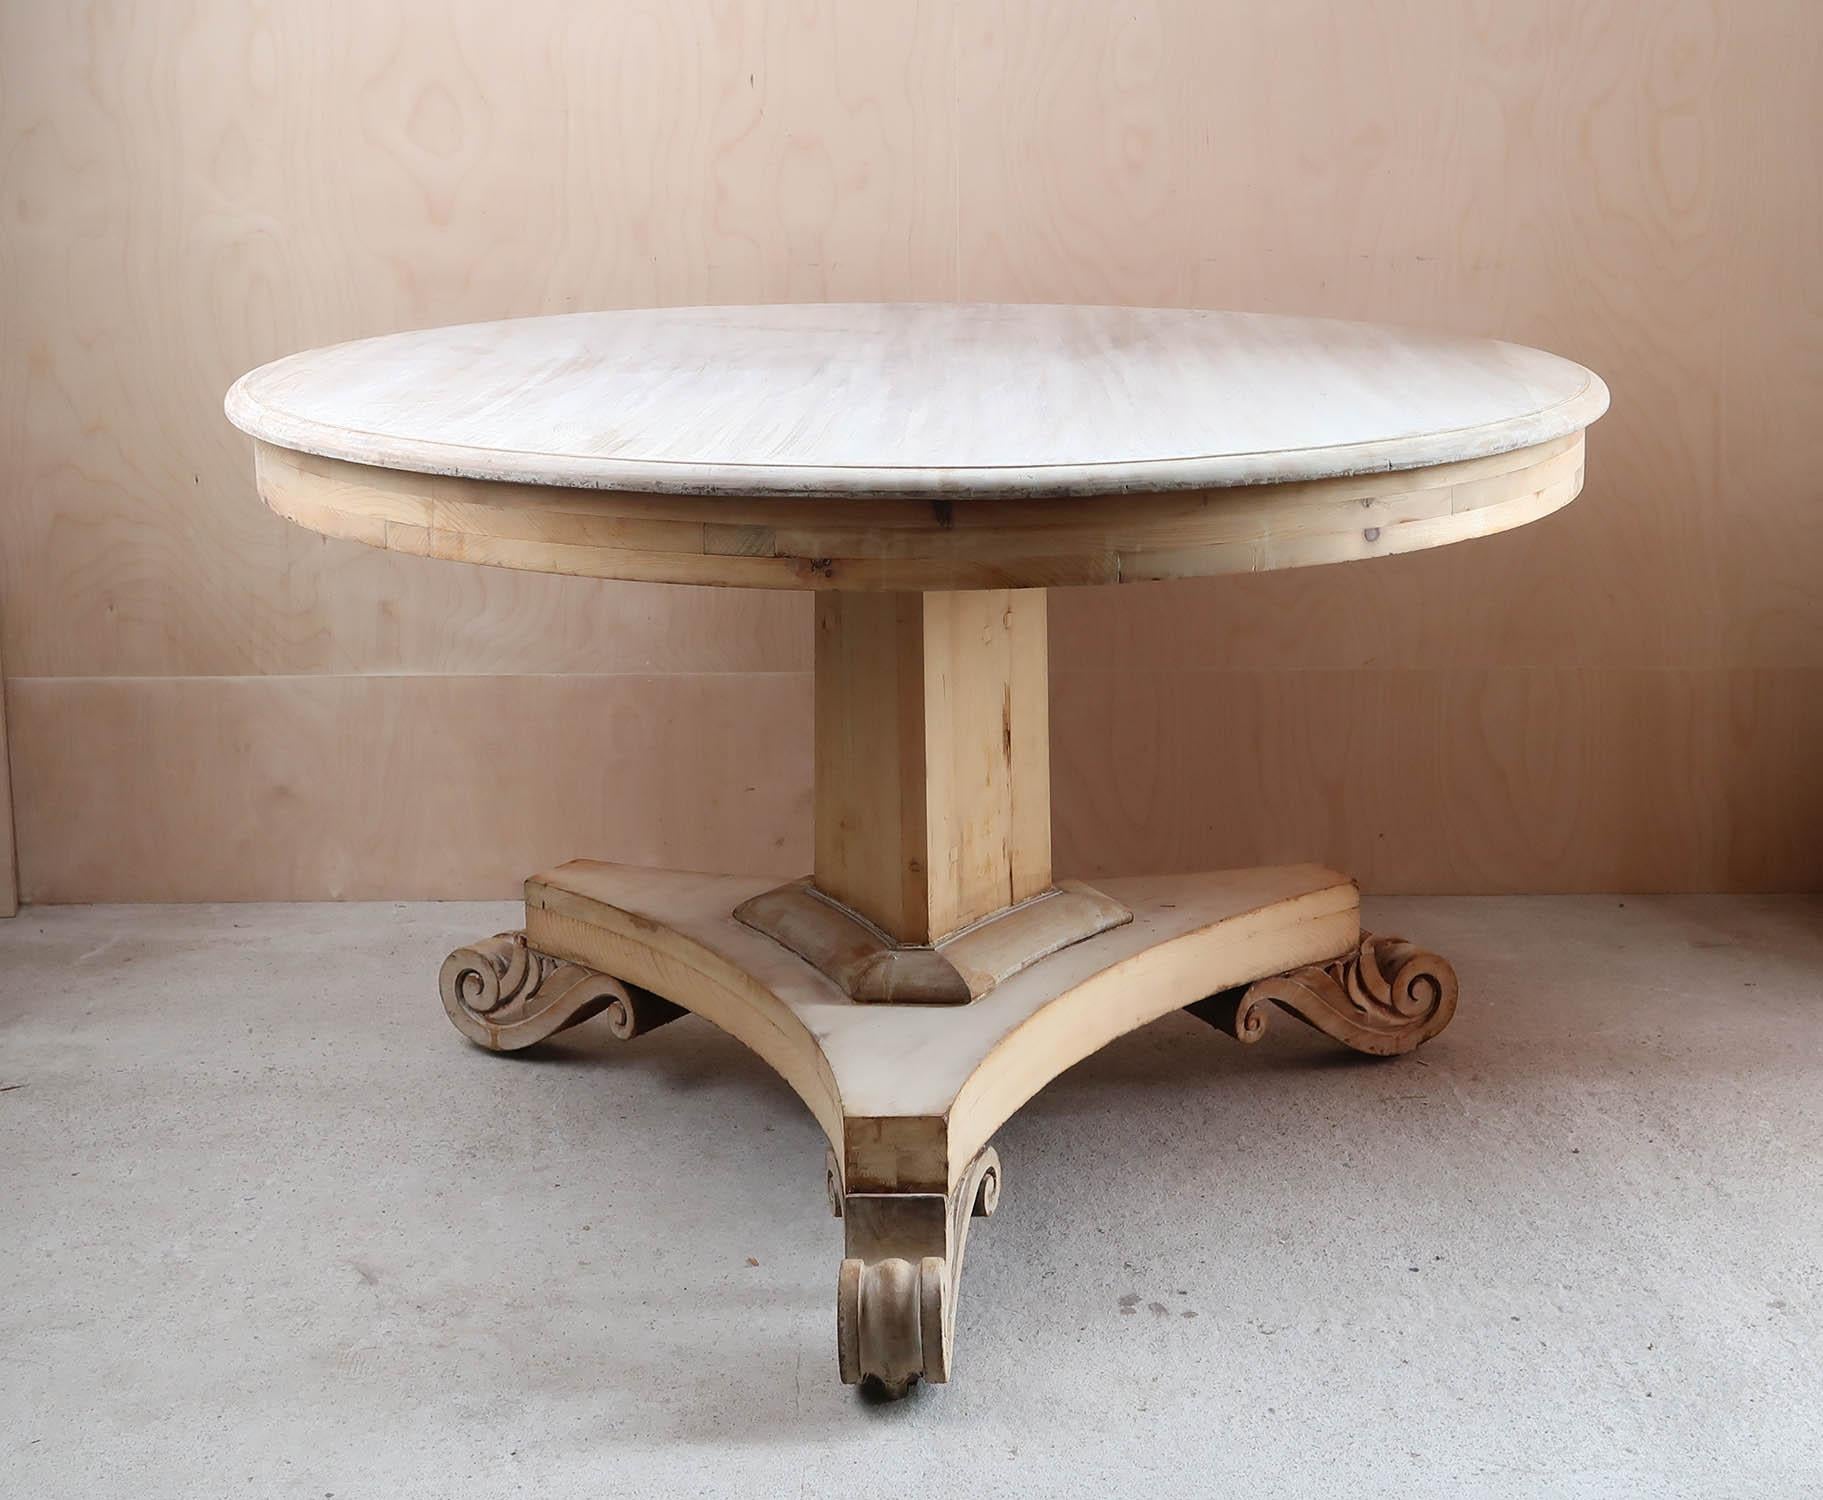 Fabulous large round Georgian table. 

Made from pine and bleached tropical hardwood.

Great simple lines. 

I particularly like the bold shaped feet

I have chosen not to lacquer or wax the table.

Original brass casters

Sturdy construction.





